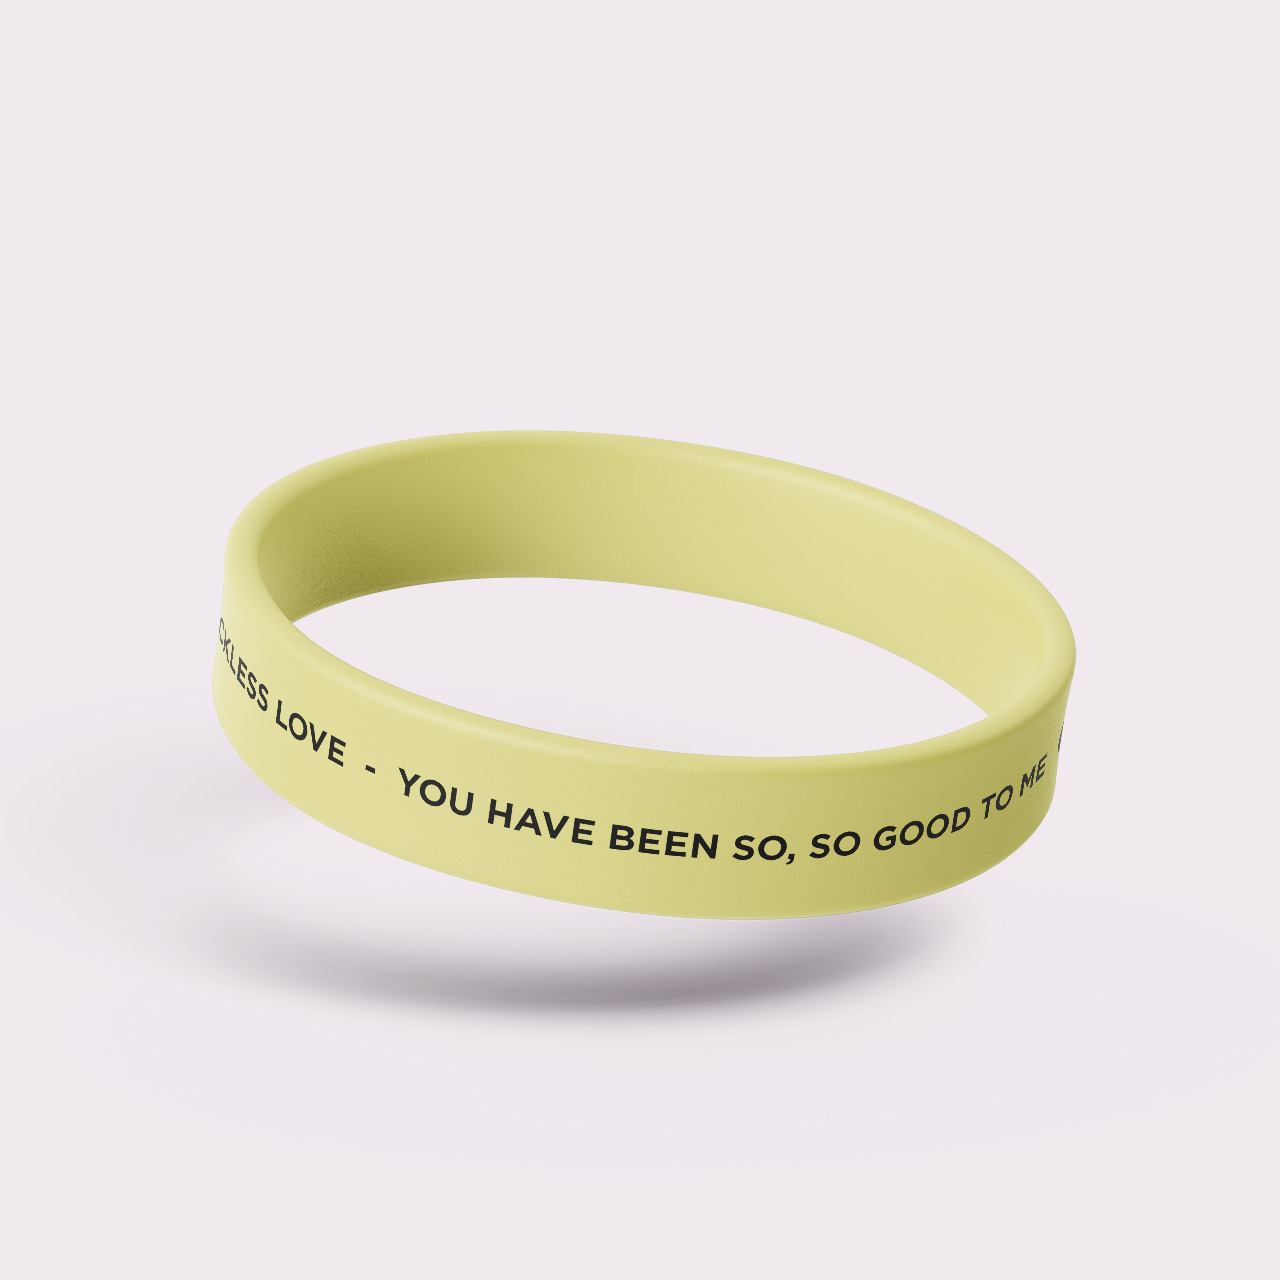 OW41008 - Siliconen armband - Reckless love - You have been so, so good to me